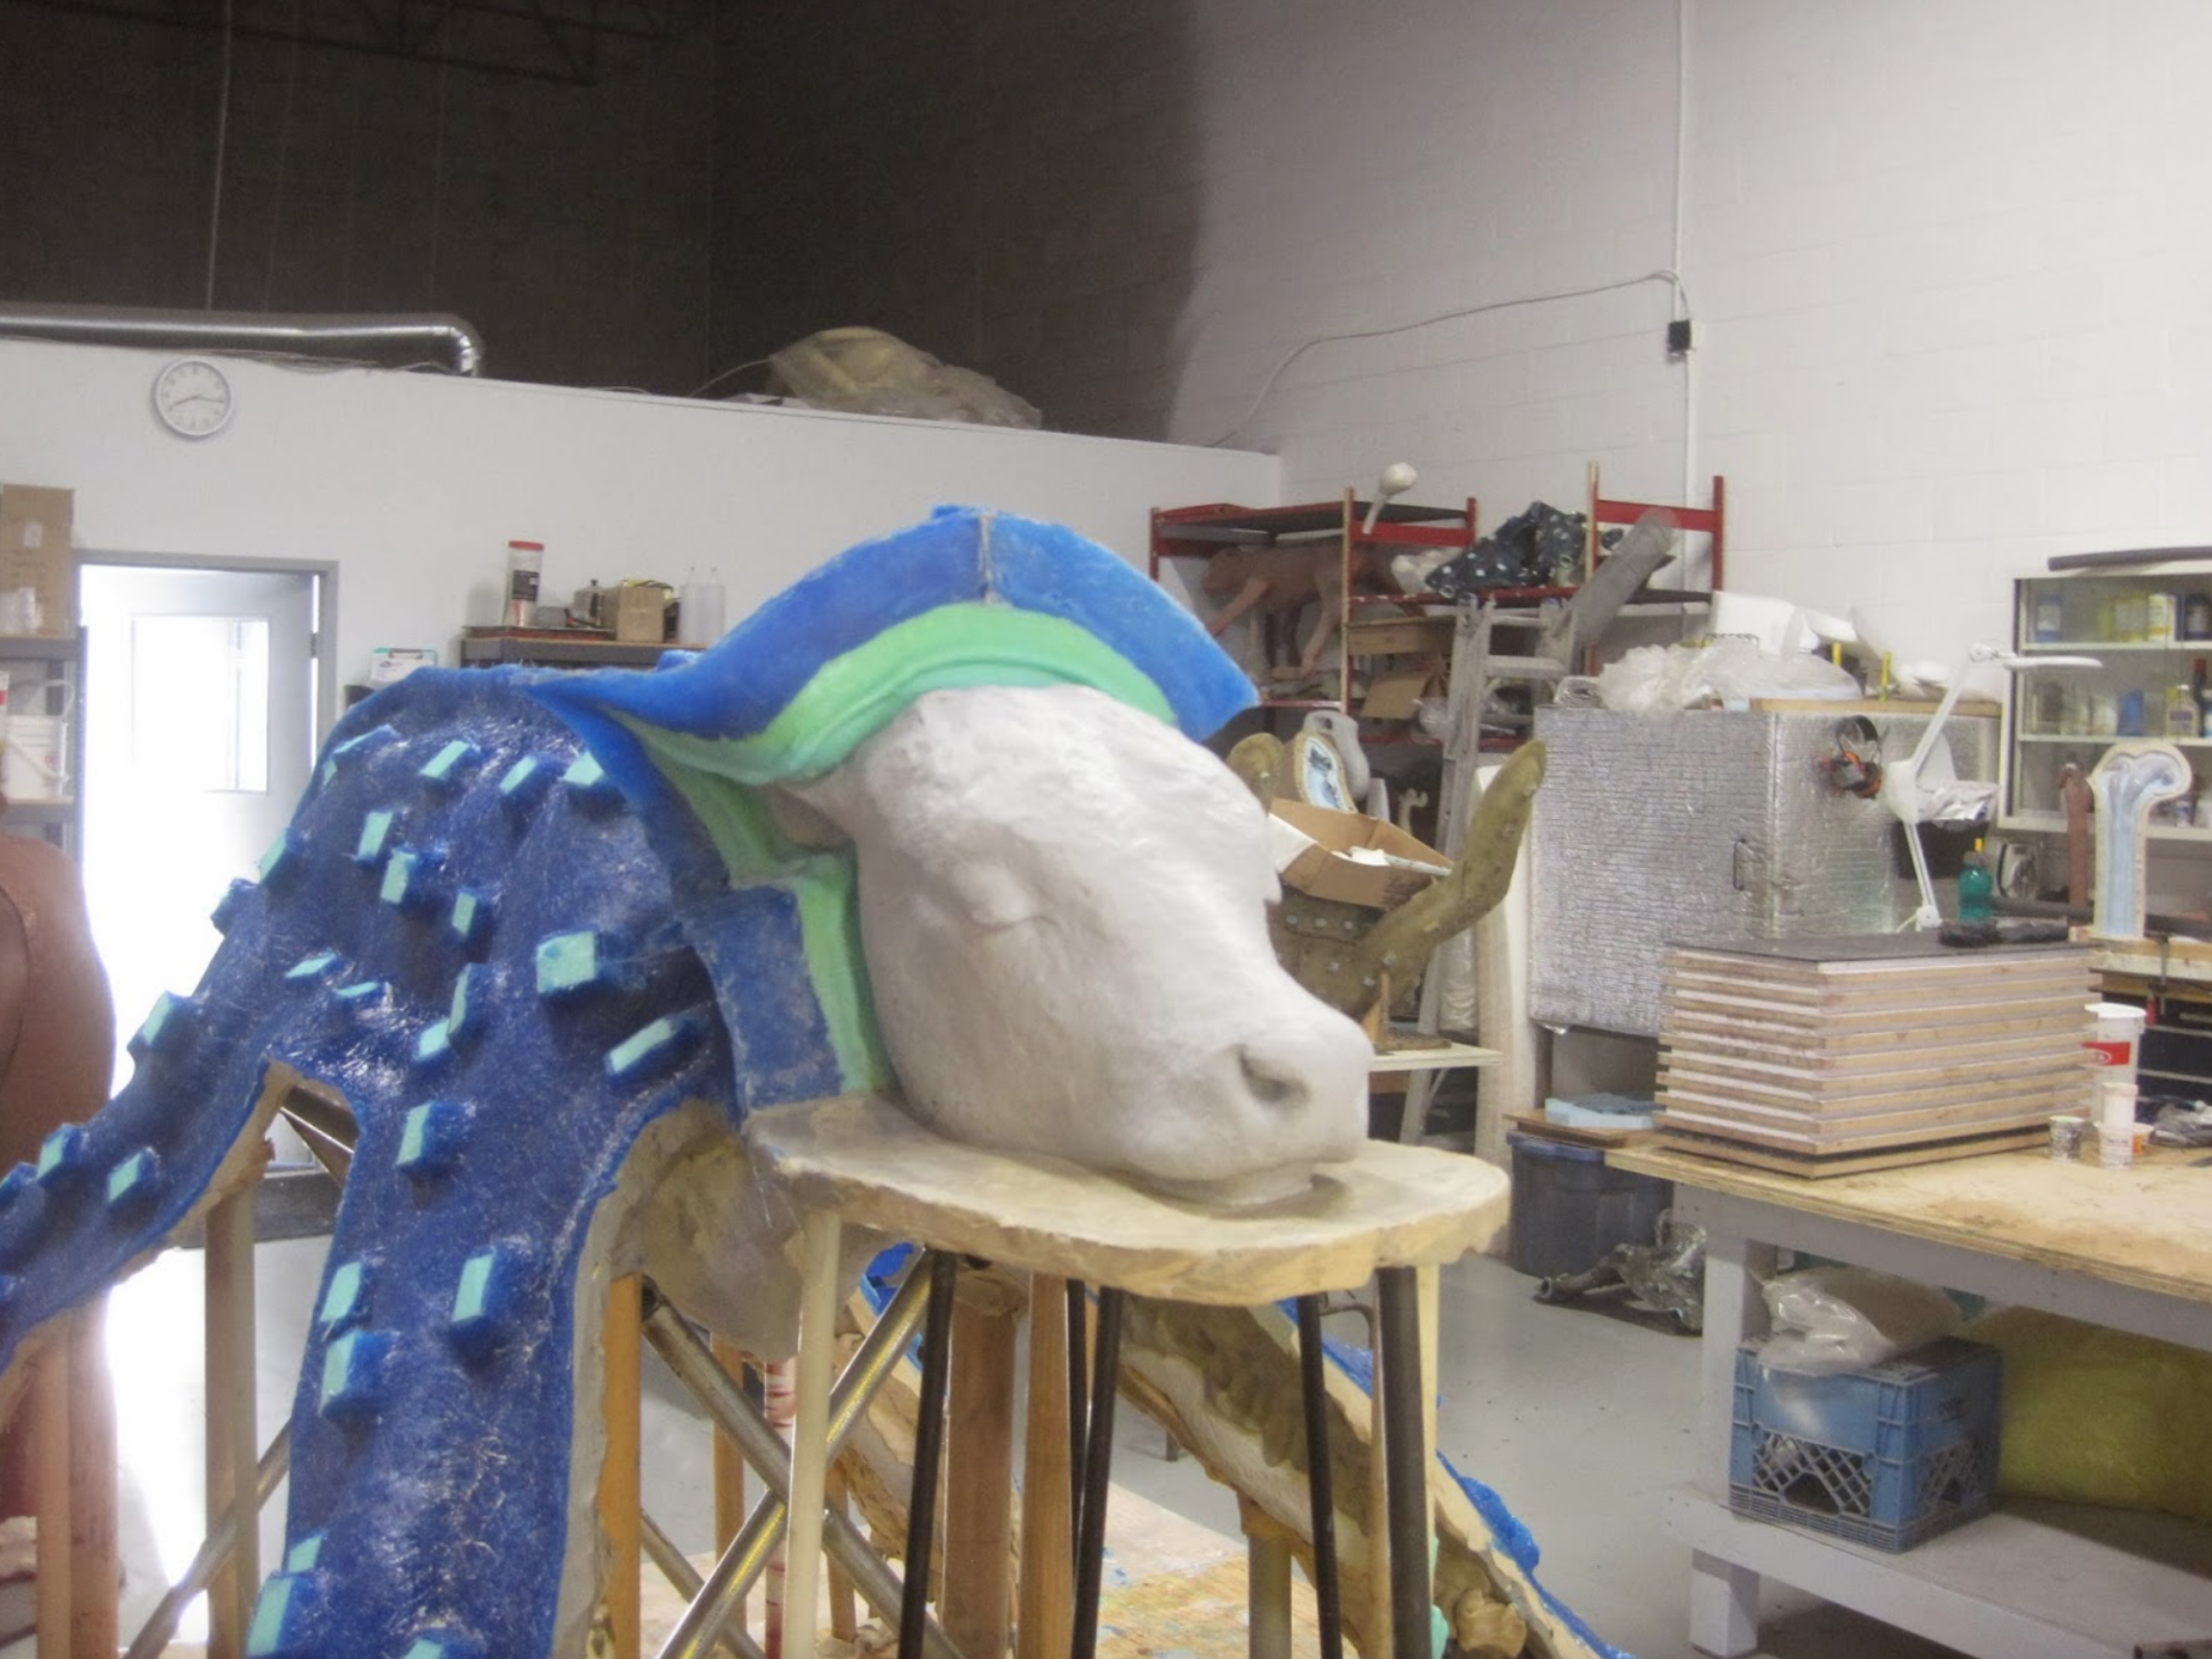  The dystocia calf model part way through the molding process. We have made improvements to both sculpture and mold to improve quality of the finished product. 